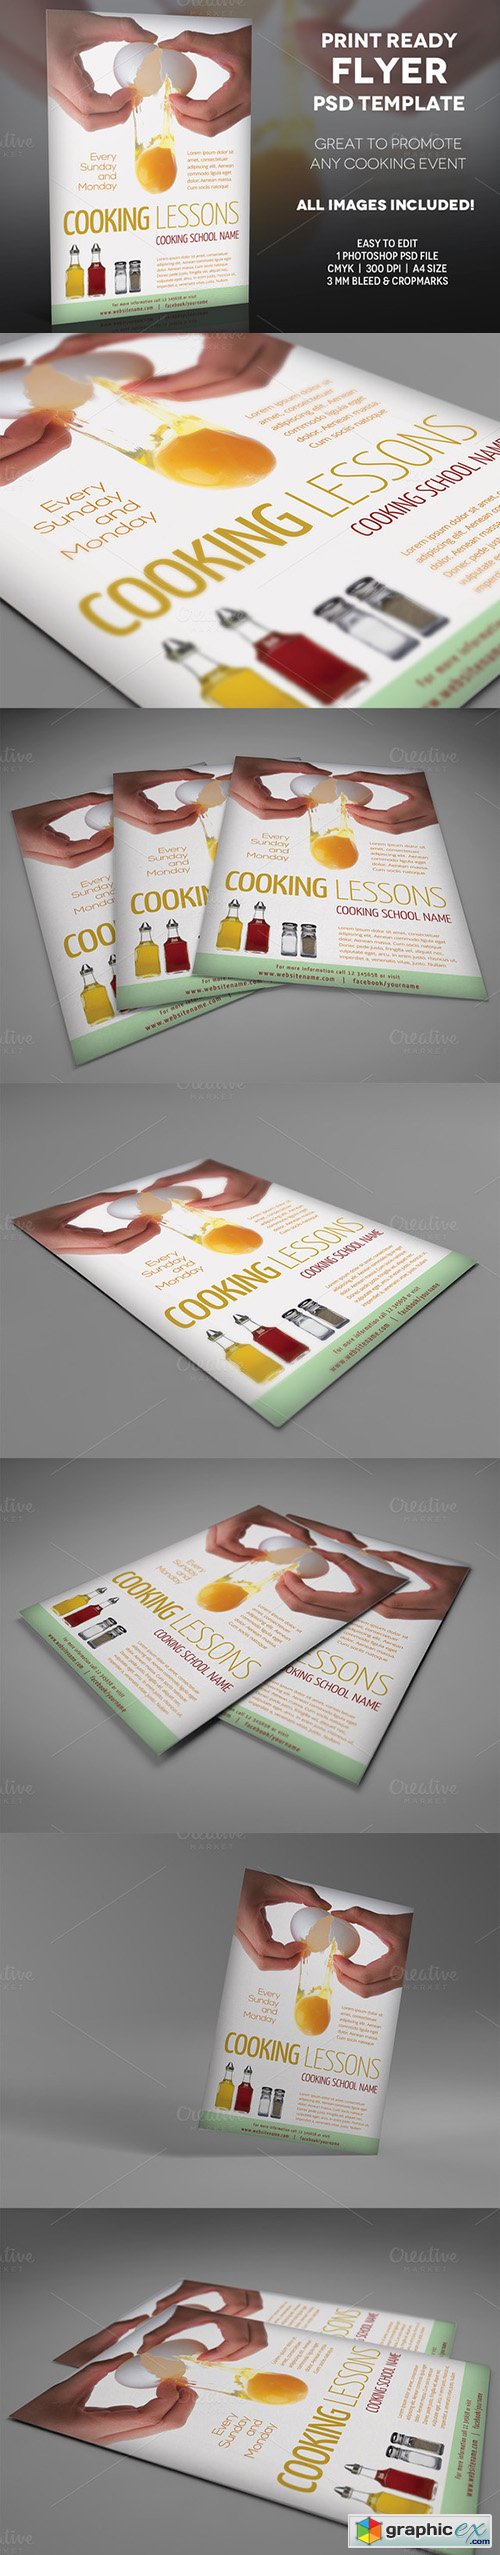  Cooking Lessons 2 - A4 Flyer Template